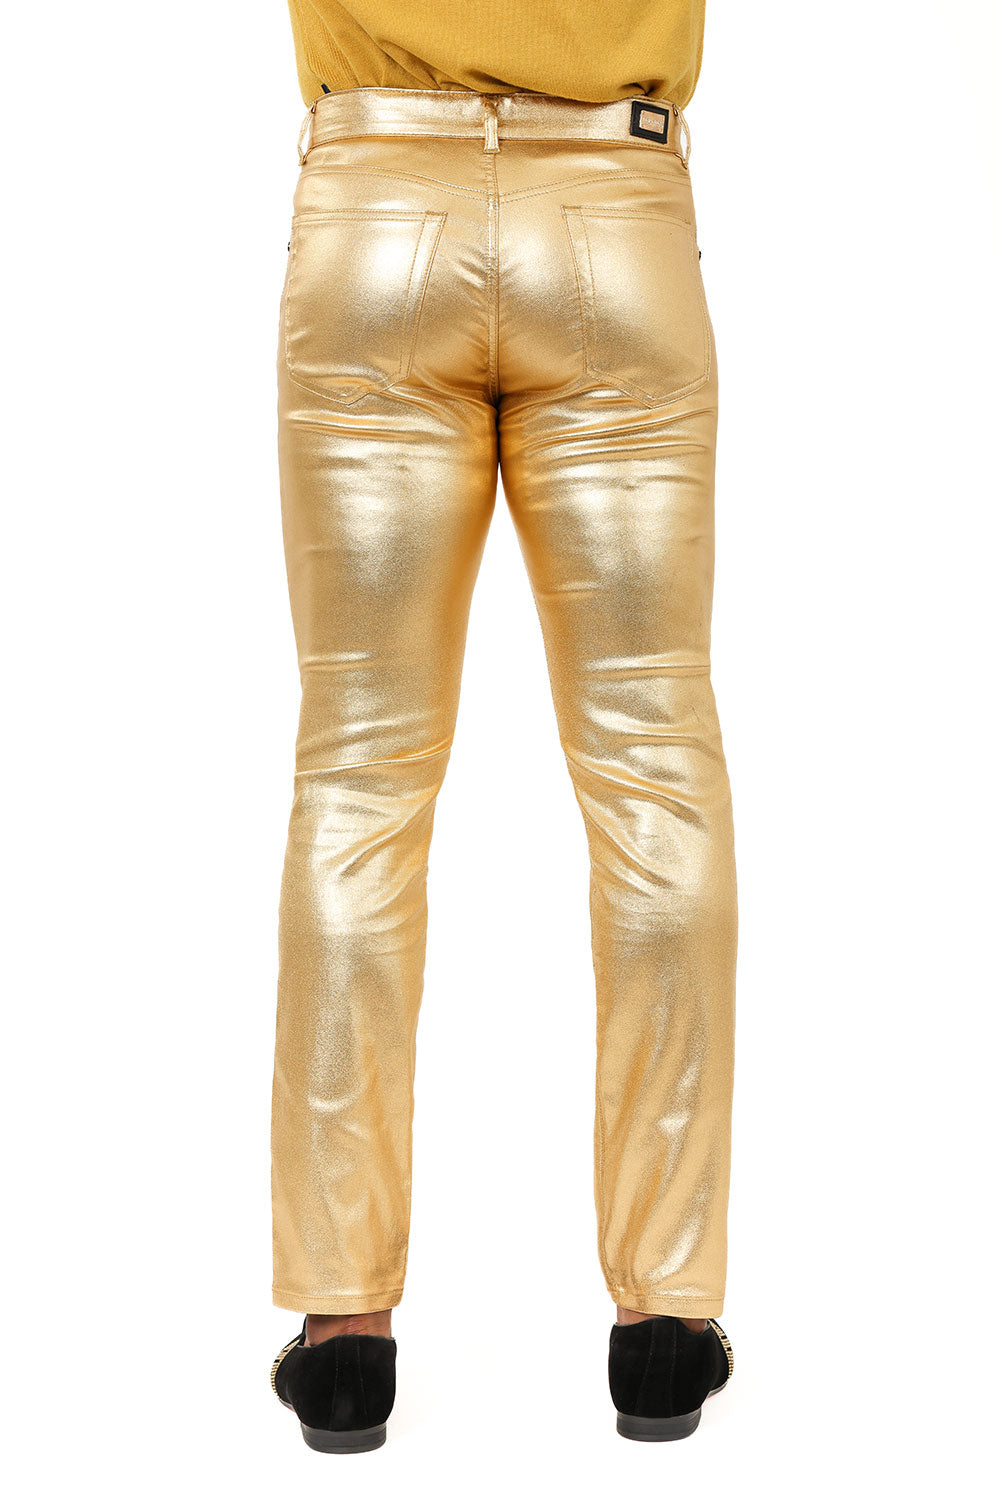 Barabas Men's Glossy Shiny Design Sparkly Luxury Dress Pants 2CPW27 Gold